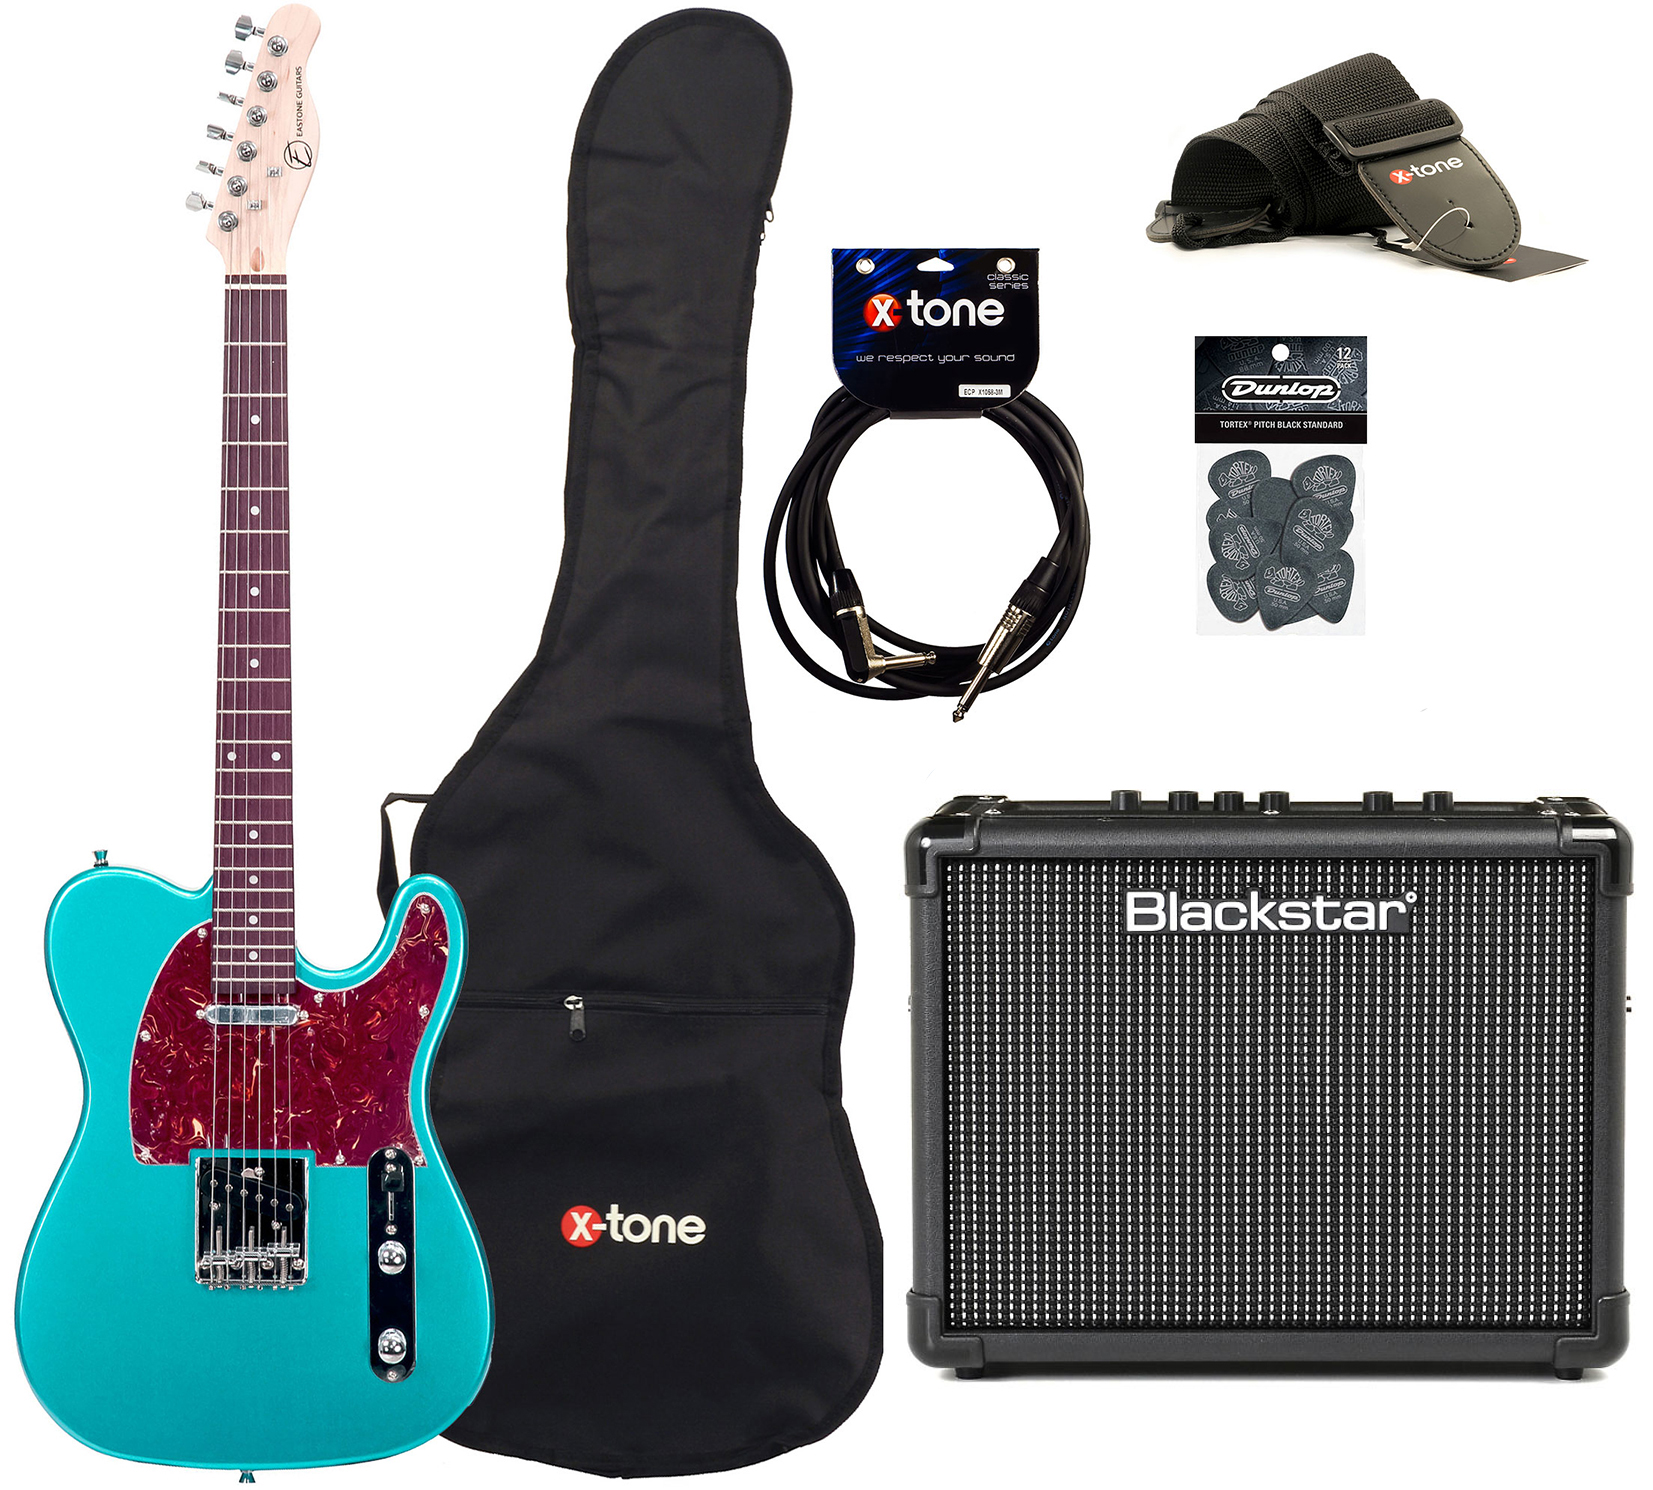 Ironisk Foresee Spændende Eastone TL70 +Blackstar Id Core Stereo 10 V3 +Accessories - metallic light  blue Electric guitar set blue